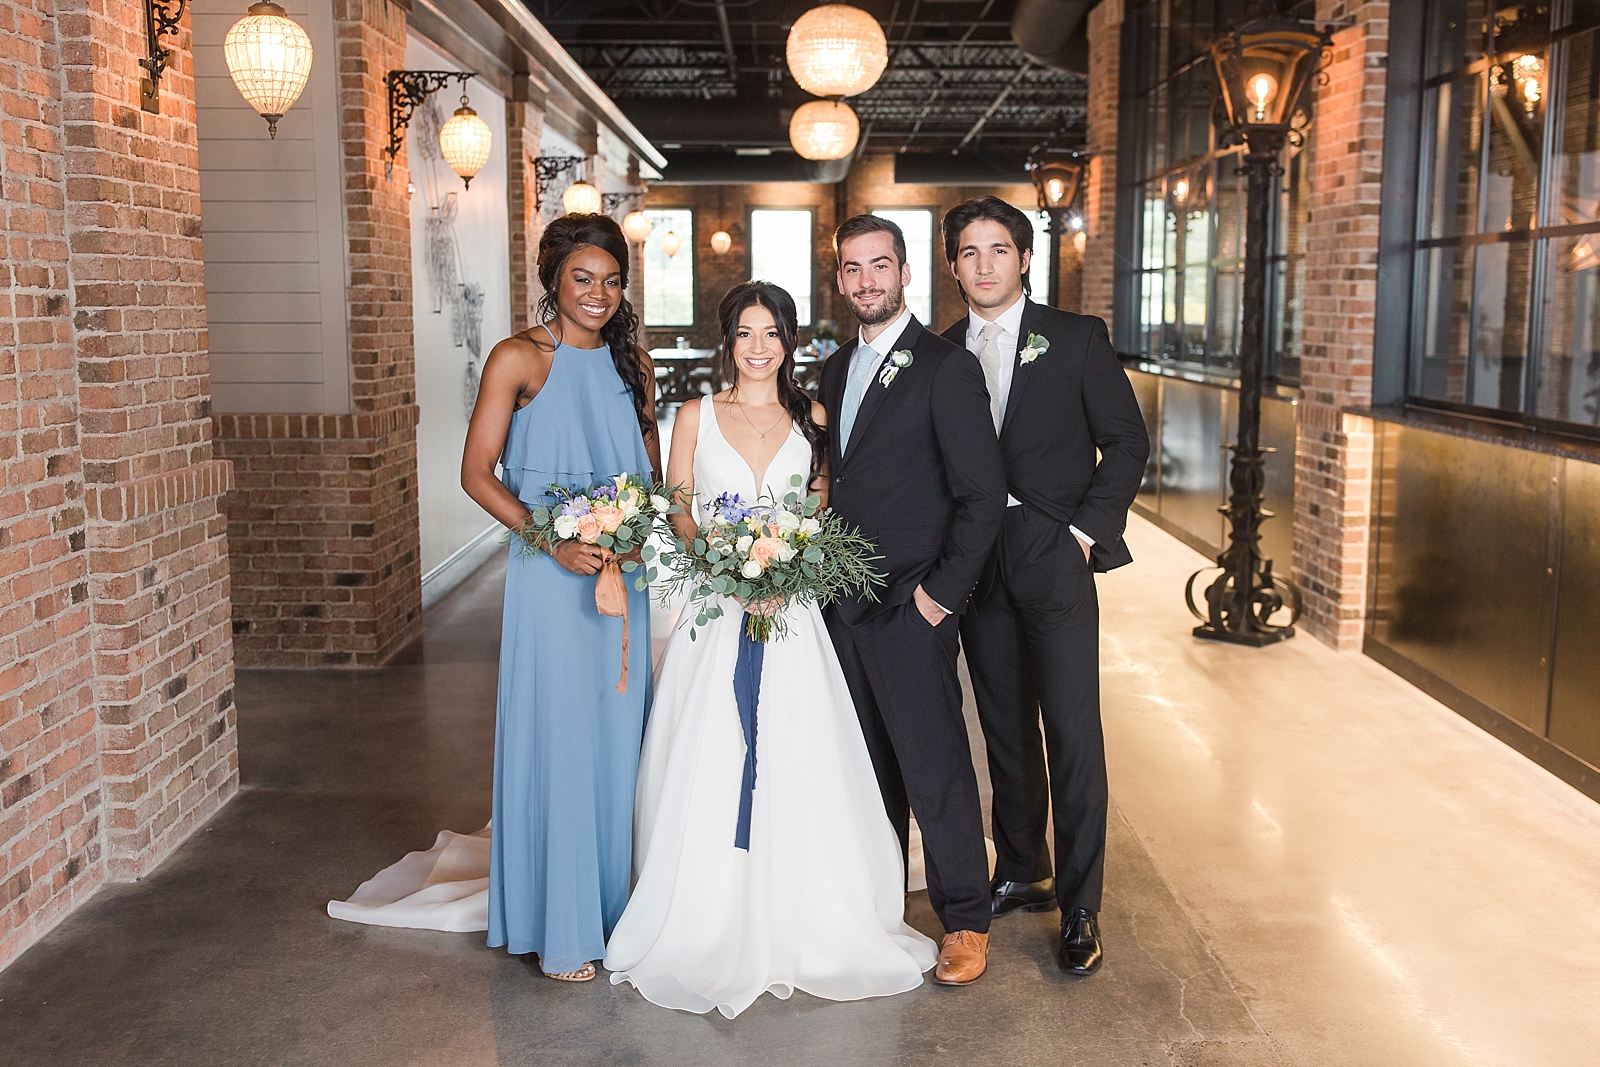 Glover Park Brewery Wedding Party in venue smiling at the camera Photo